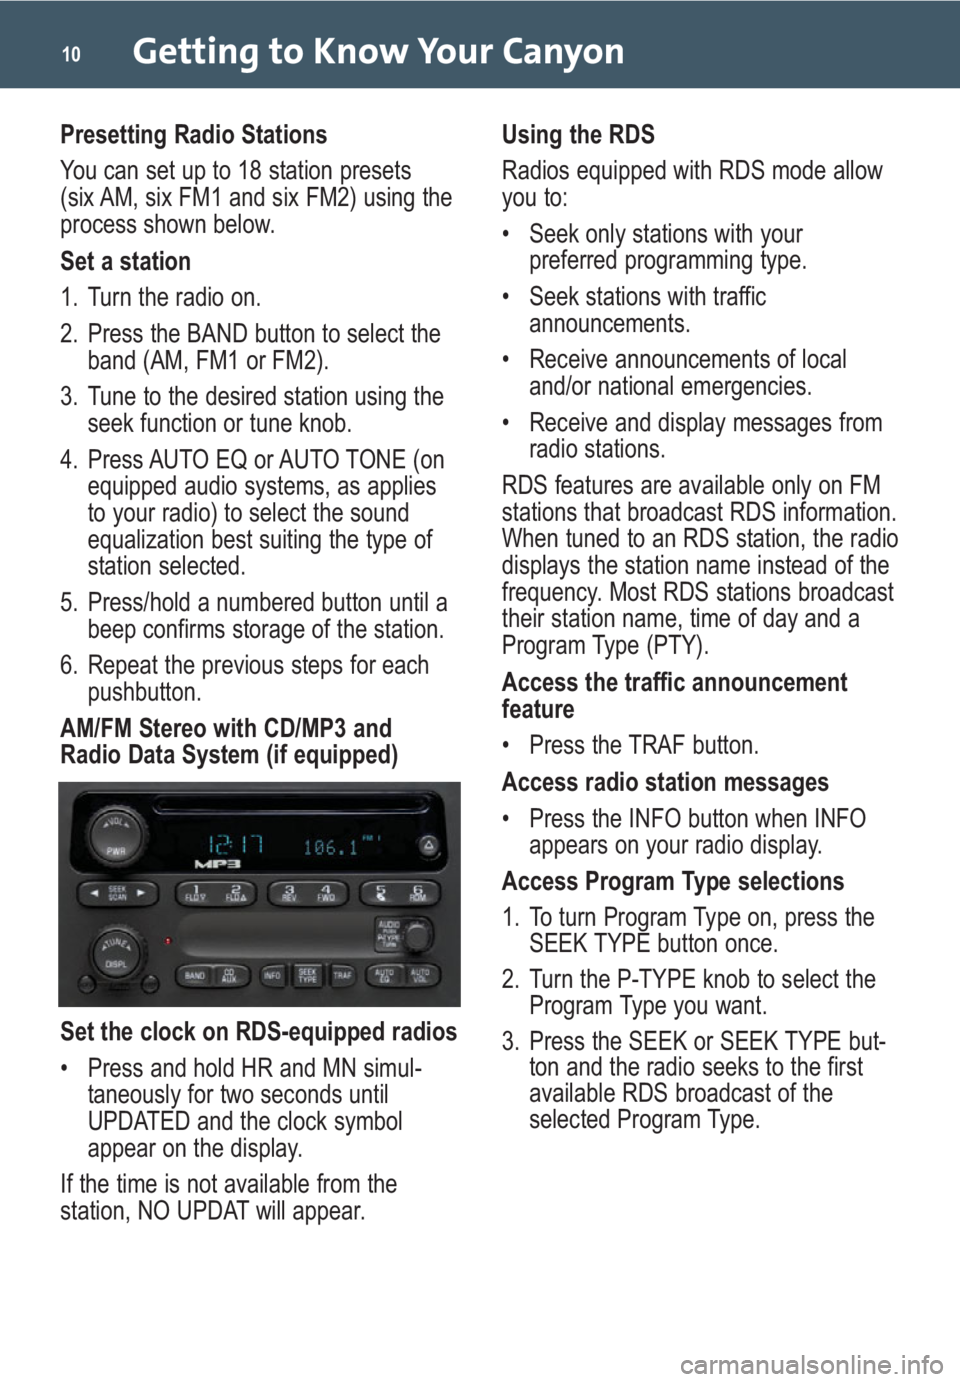 GMC CANYON 2009  Get To Know Guide Getting to Know Your Canyon10
Presetting Radio Stations
You can set up to 18 station presets
(six AM, six FM1 and six FM2) using the
process shown below.
Set a station
1. Turn the radio on.
2. Press t